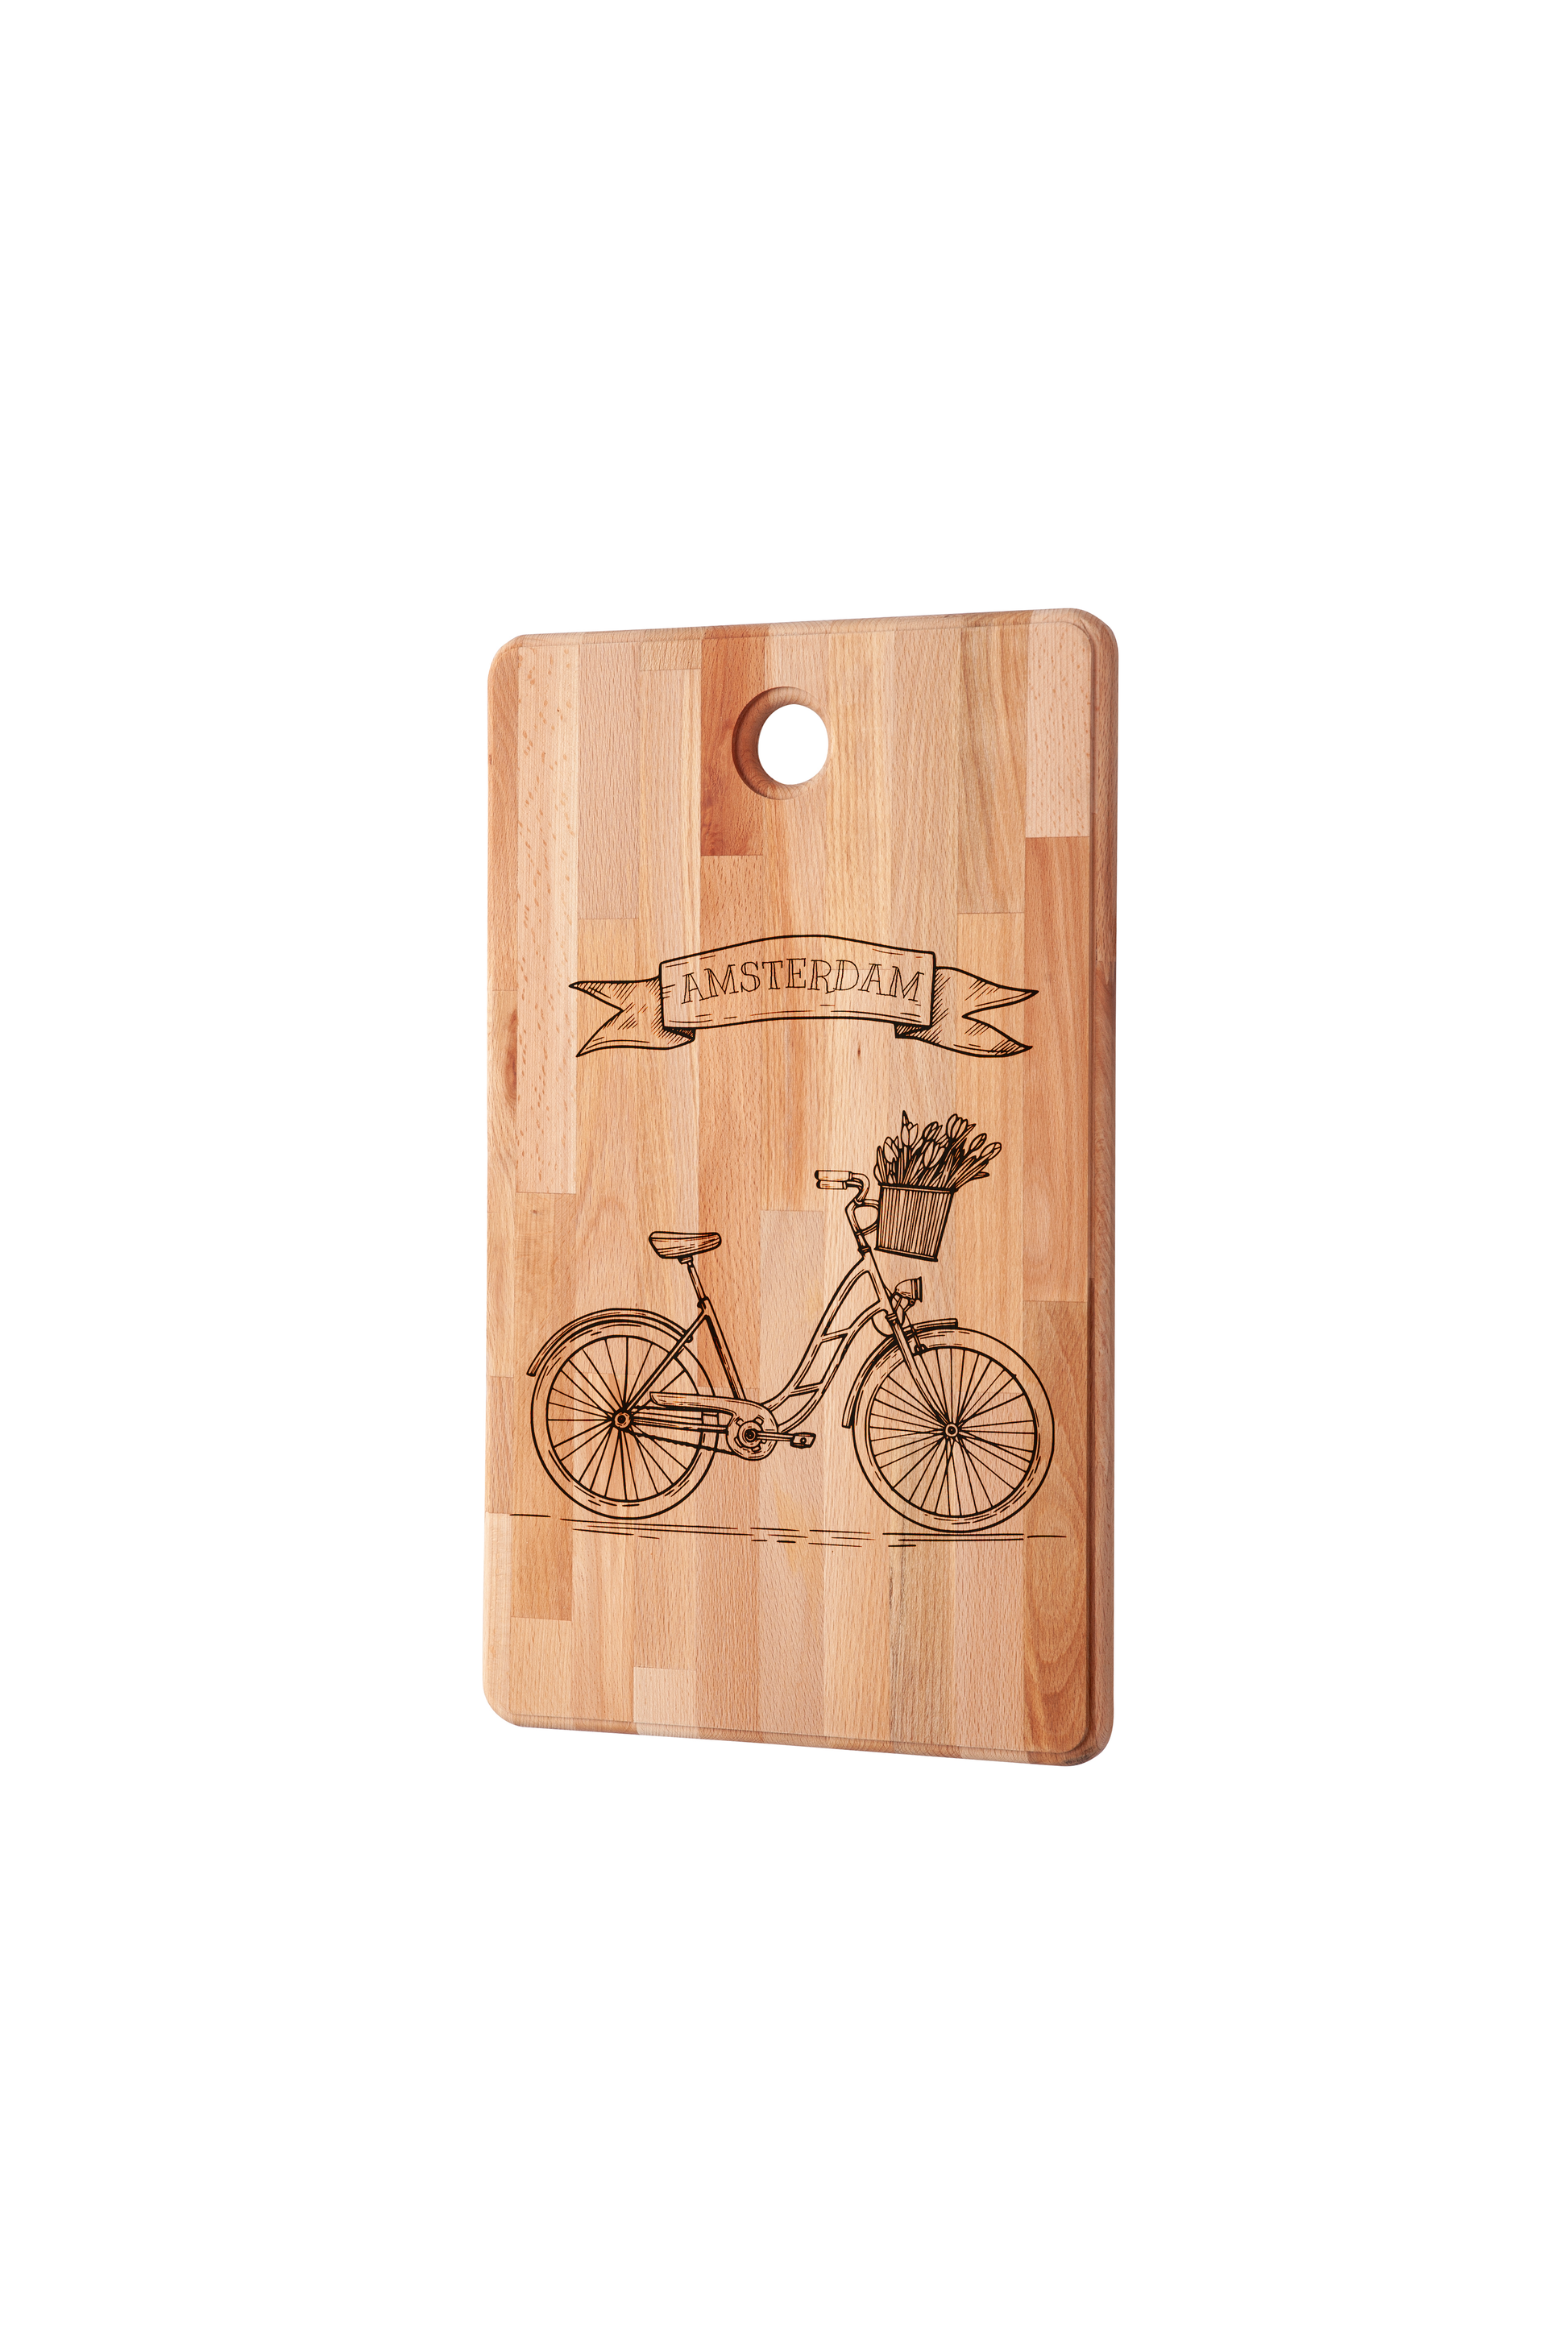 Amsterdam, Bicycle, cutting board, side view